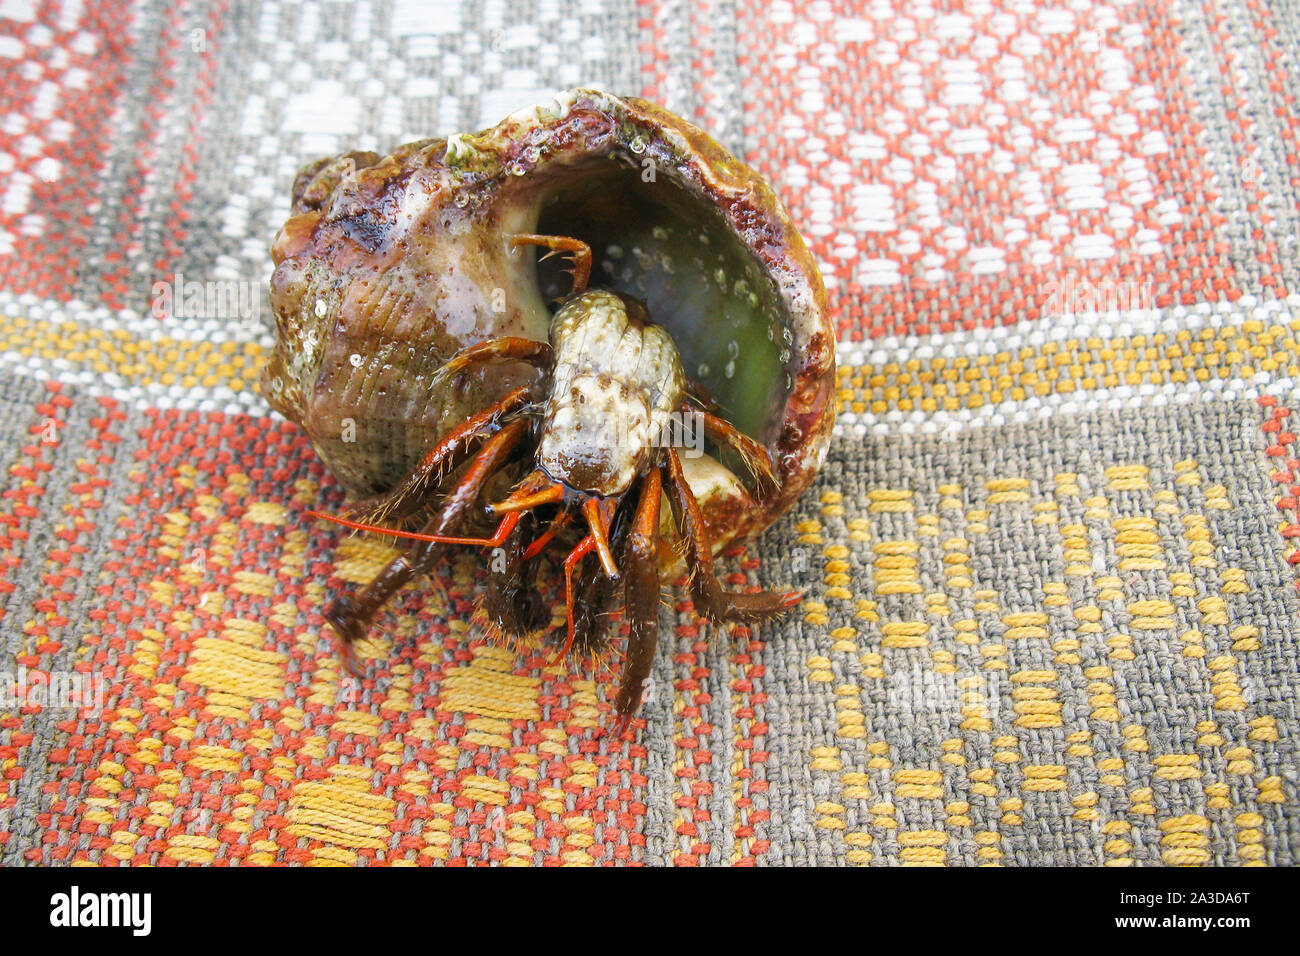 Caught Hermit Crab on the Carpet. Small cute crayfish in a shell. Stock Photo